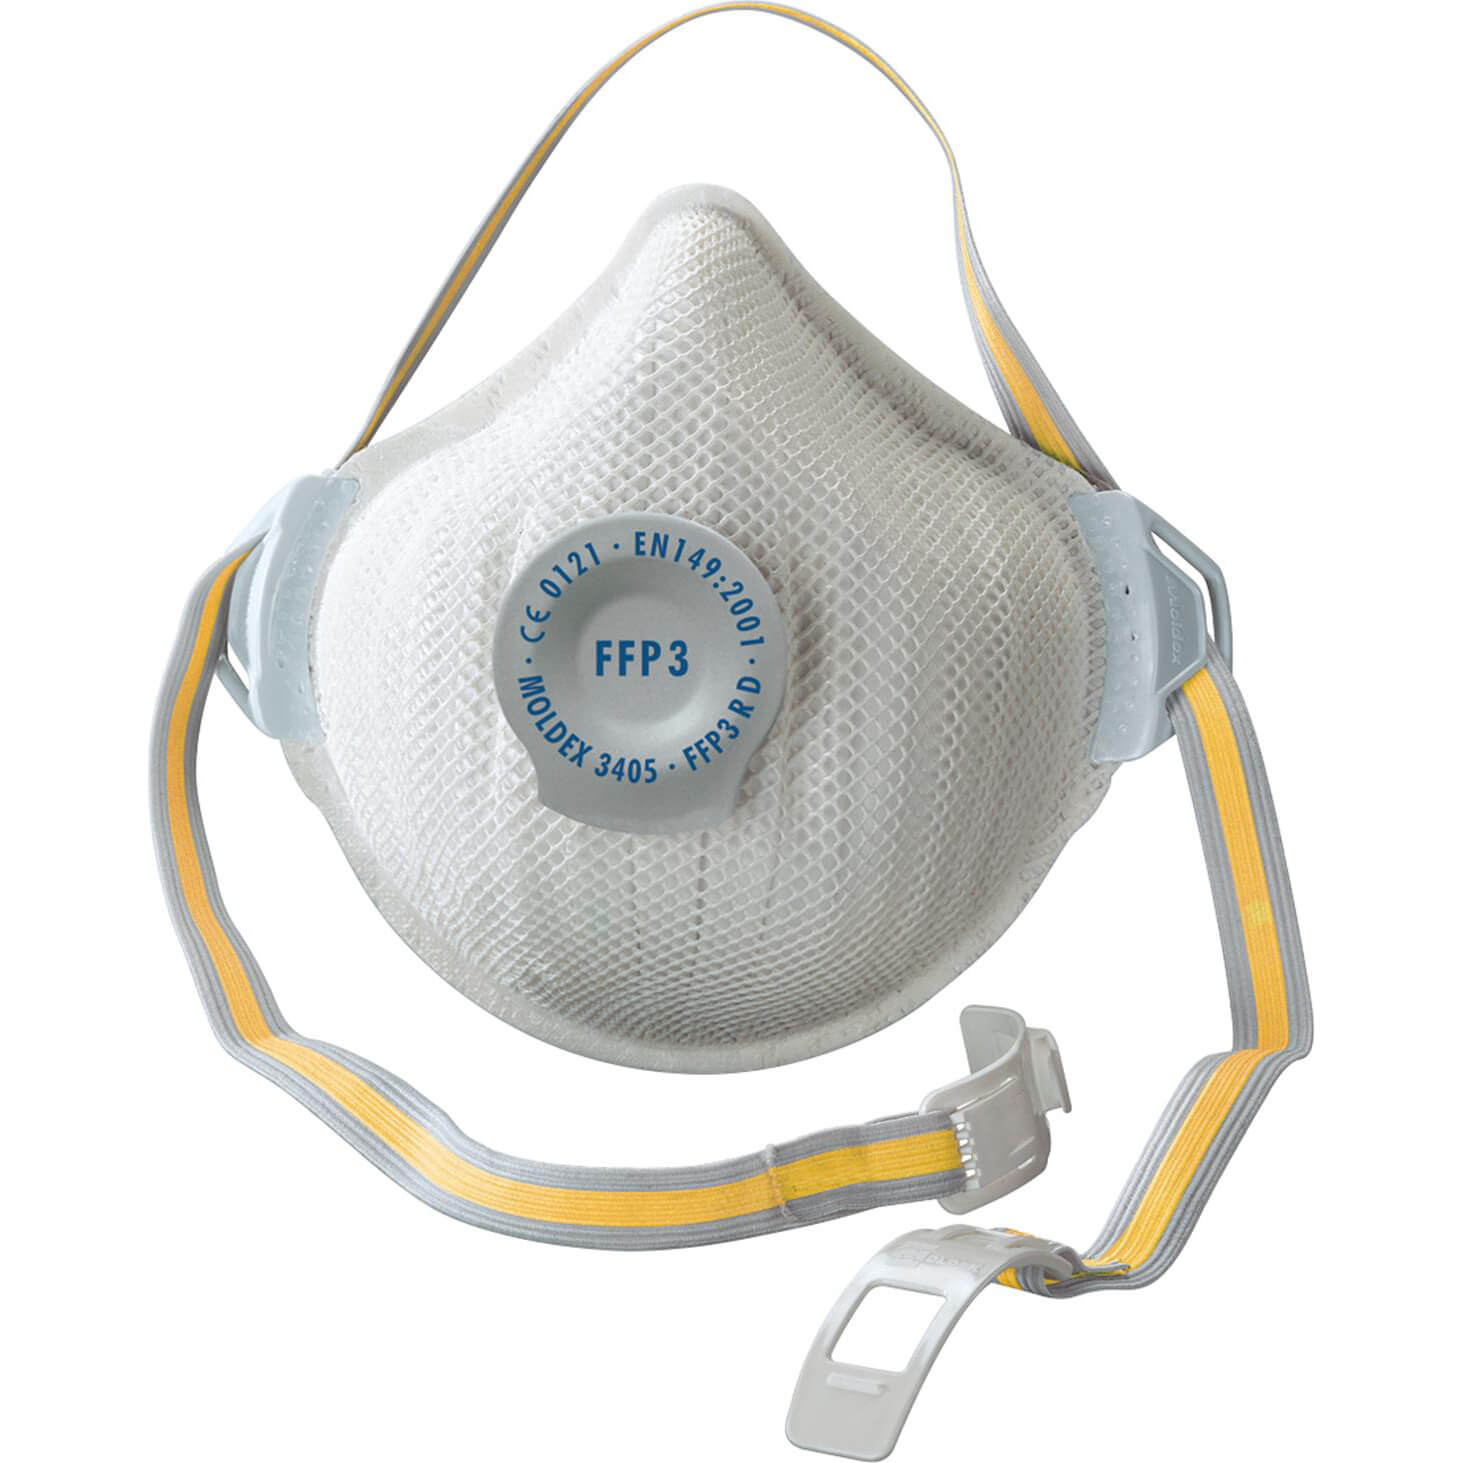 Photo of Moldex 3405 Airplus Moulded Mask Ffp3 Pack Of 5